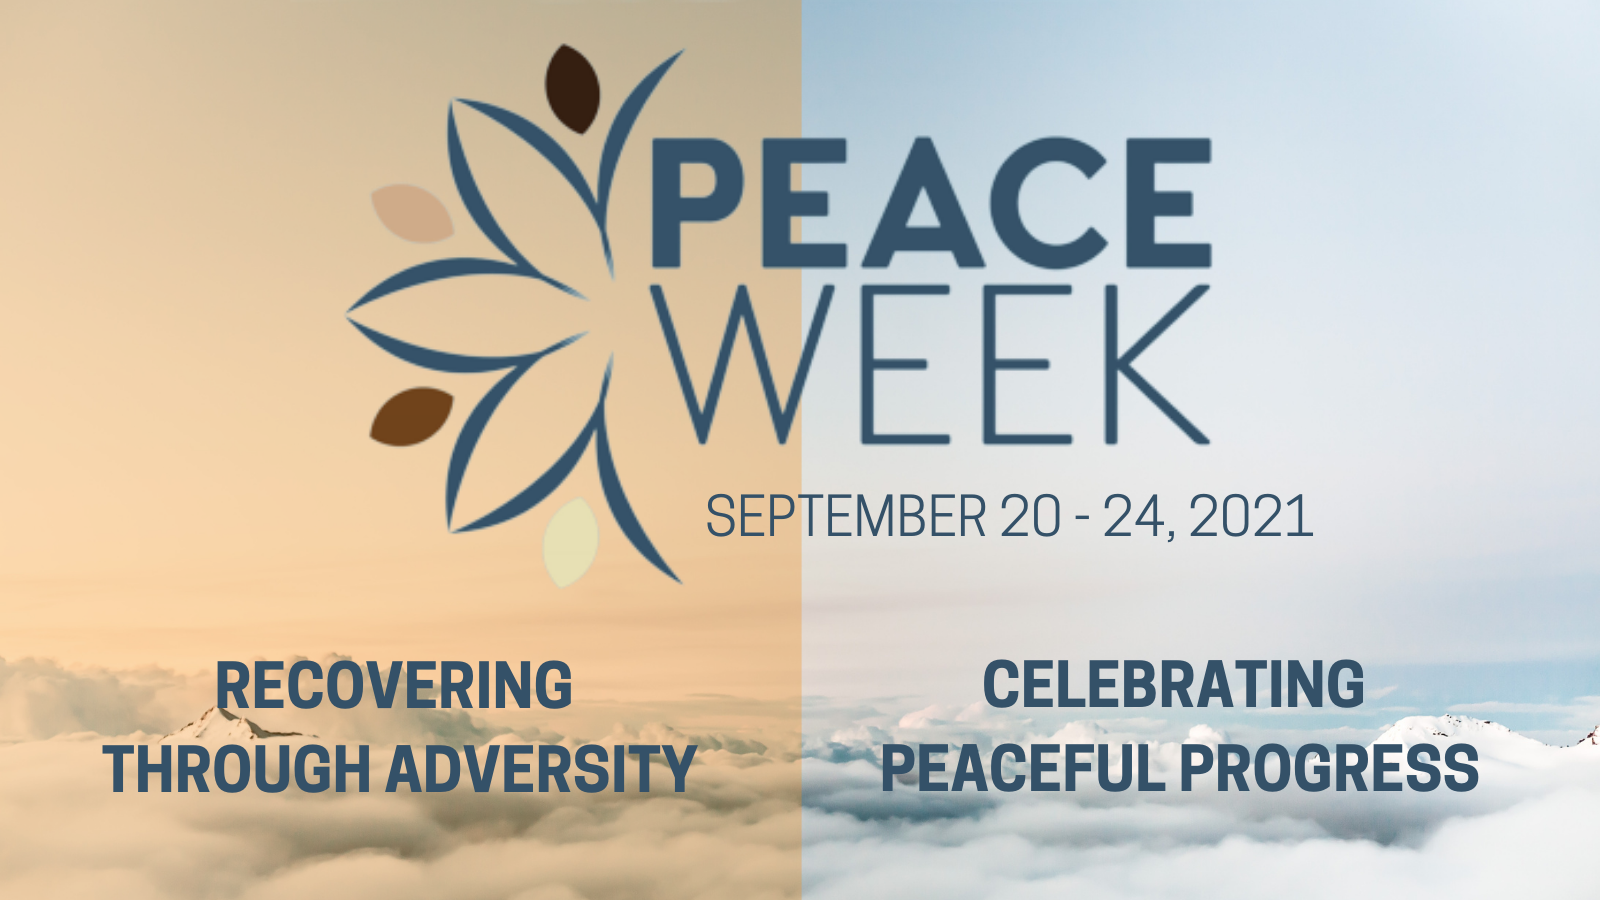 Peace Week 2021: Recovering through adversity and celebrating peaceful progress.